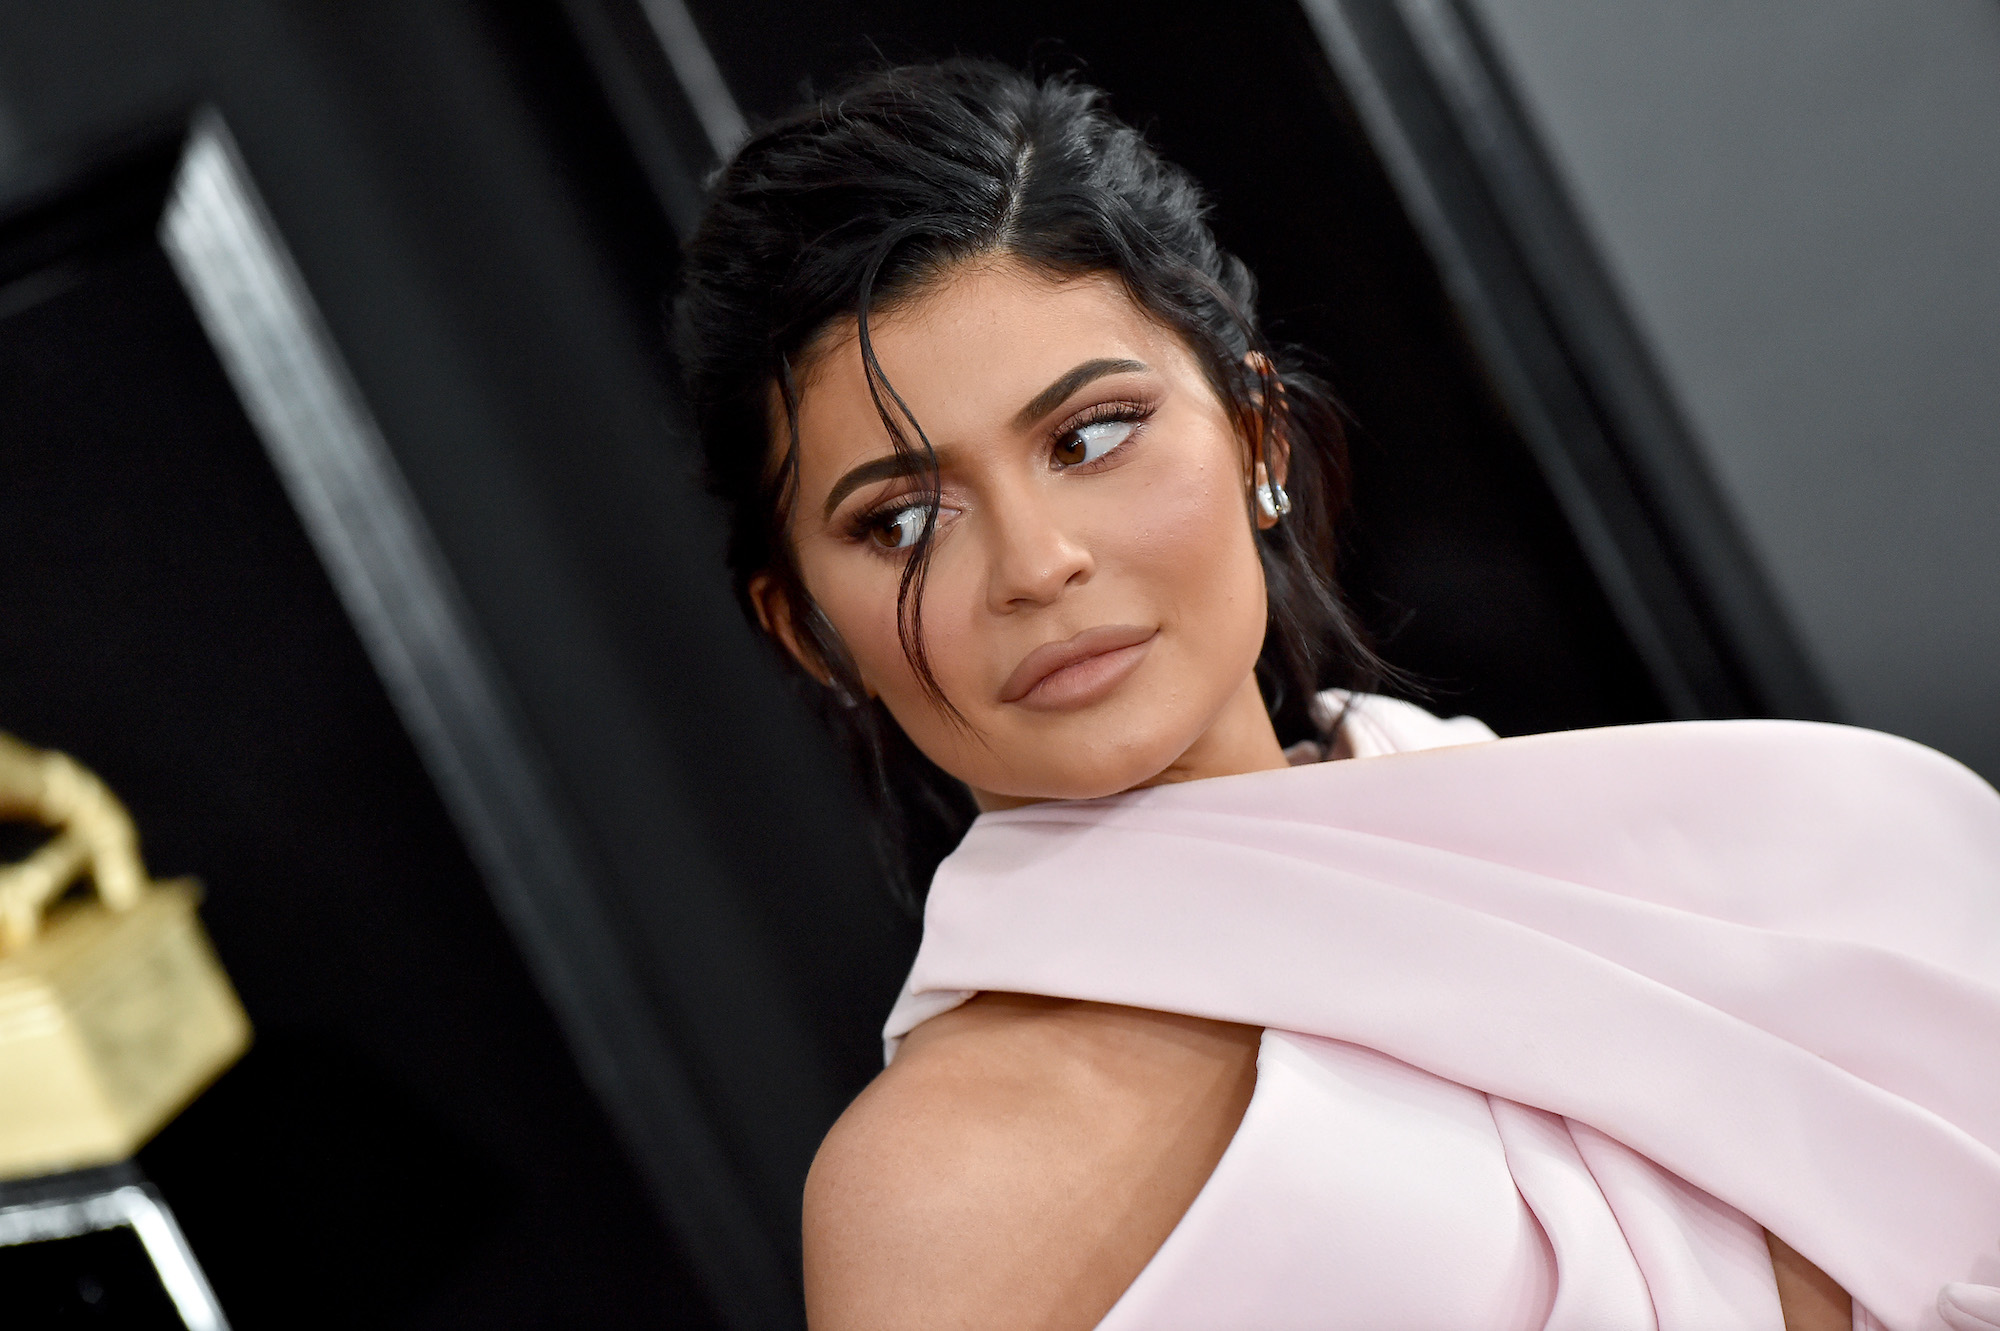 Kylie Jenner at the 61st Annual Grammy Awards